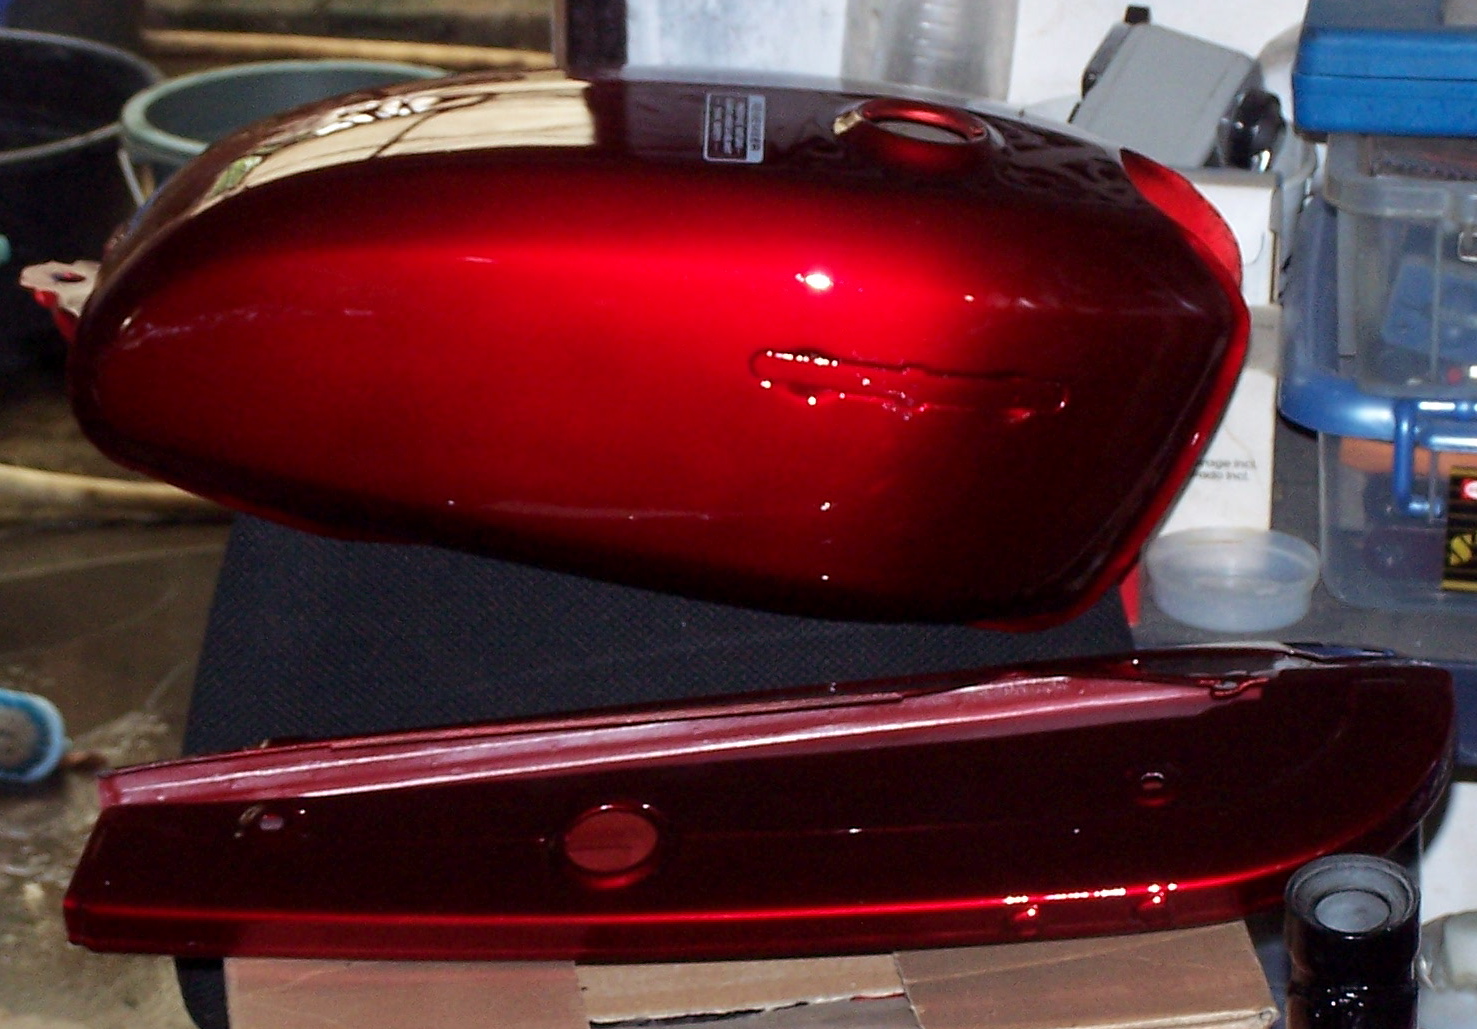 classic, vintage scooter restoration project (Honda, Vespa, Condor): Fuel tank section of Honda CB 1975 restoration project (Candy Ruby Red R4C)